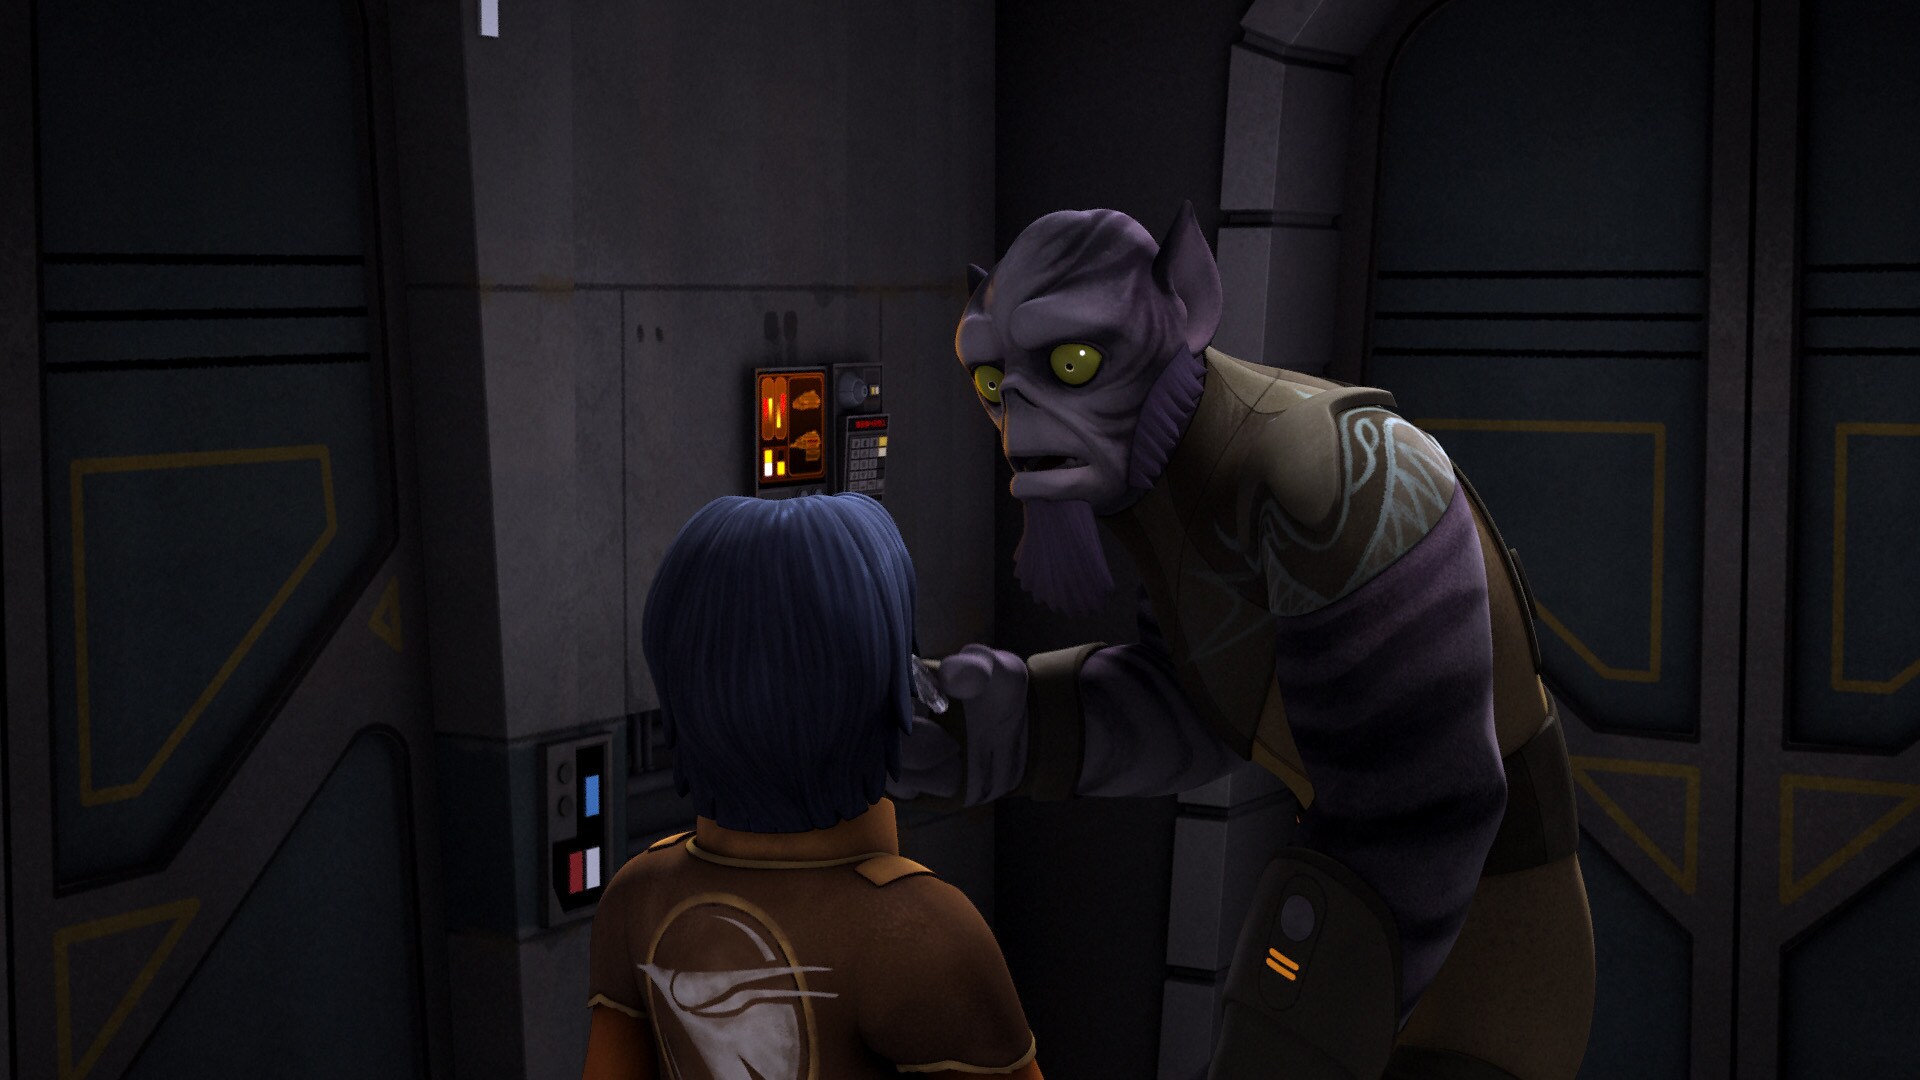 Hera and Sabine make it back into the Phantom, but find its fuel depleted. Hera contacts the Ghos...